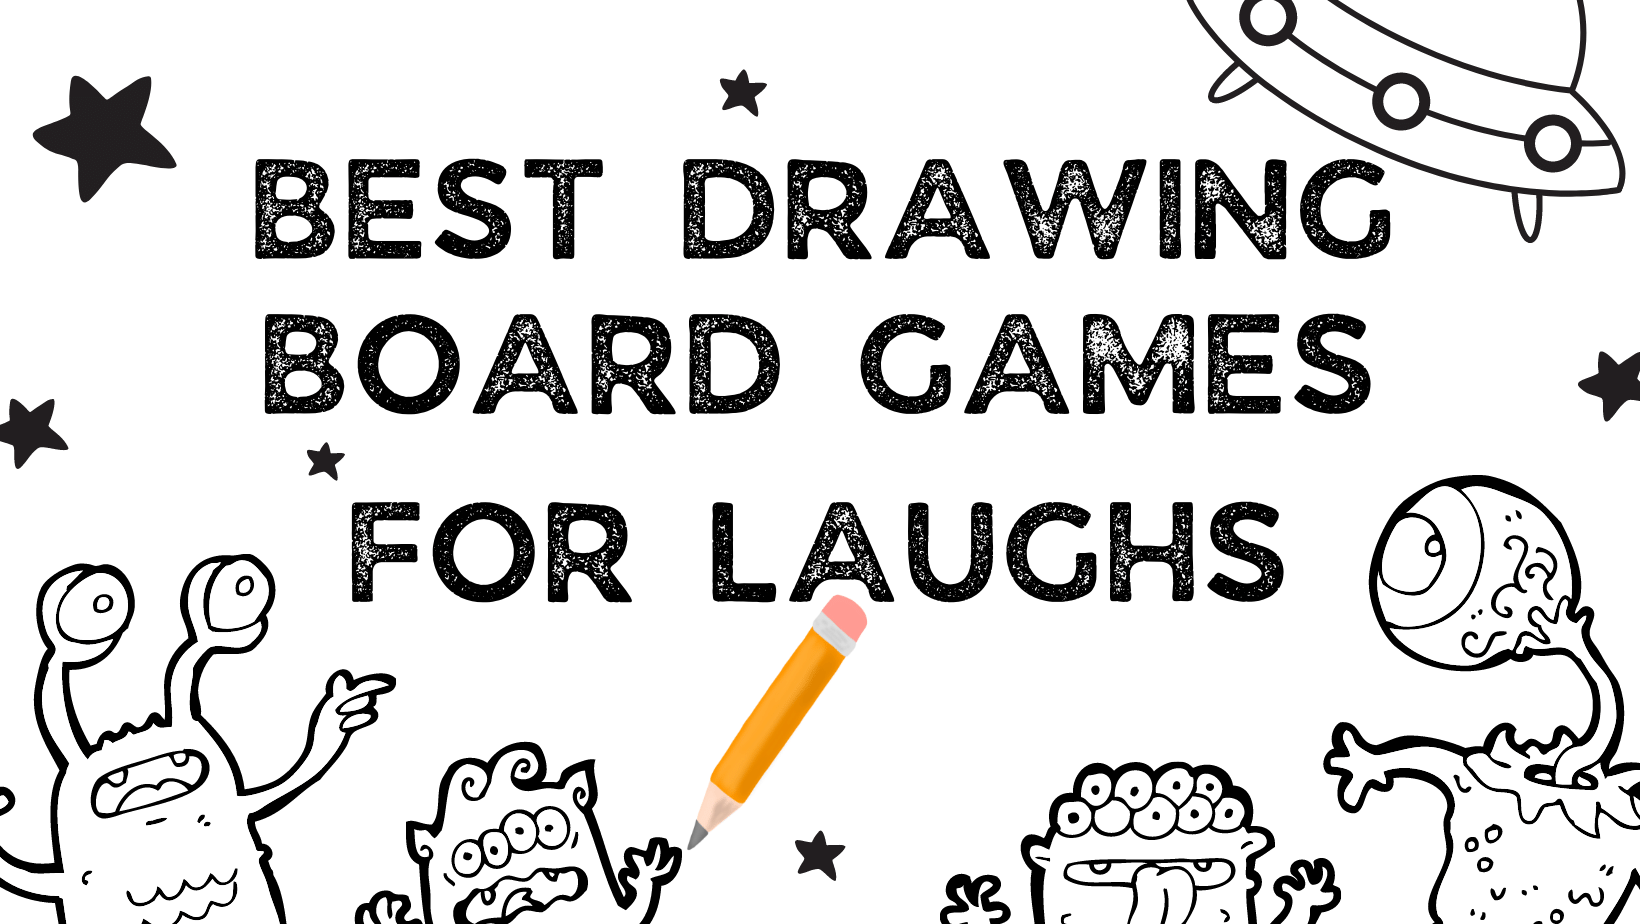 Best drawing board games for families as well as adults only